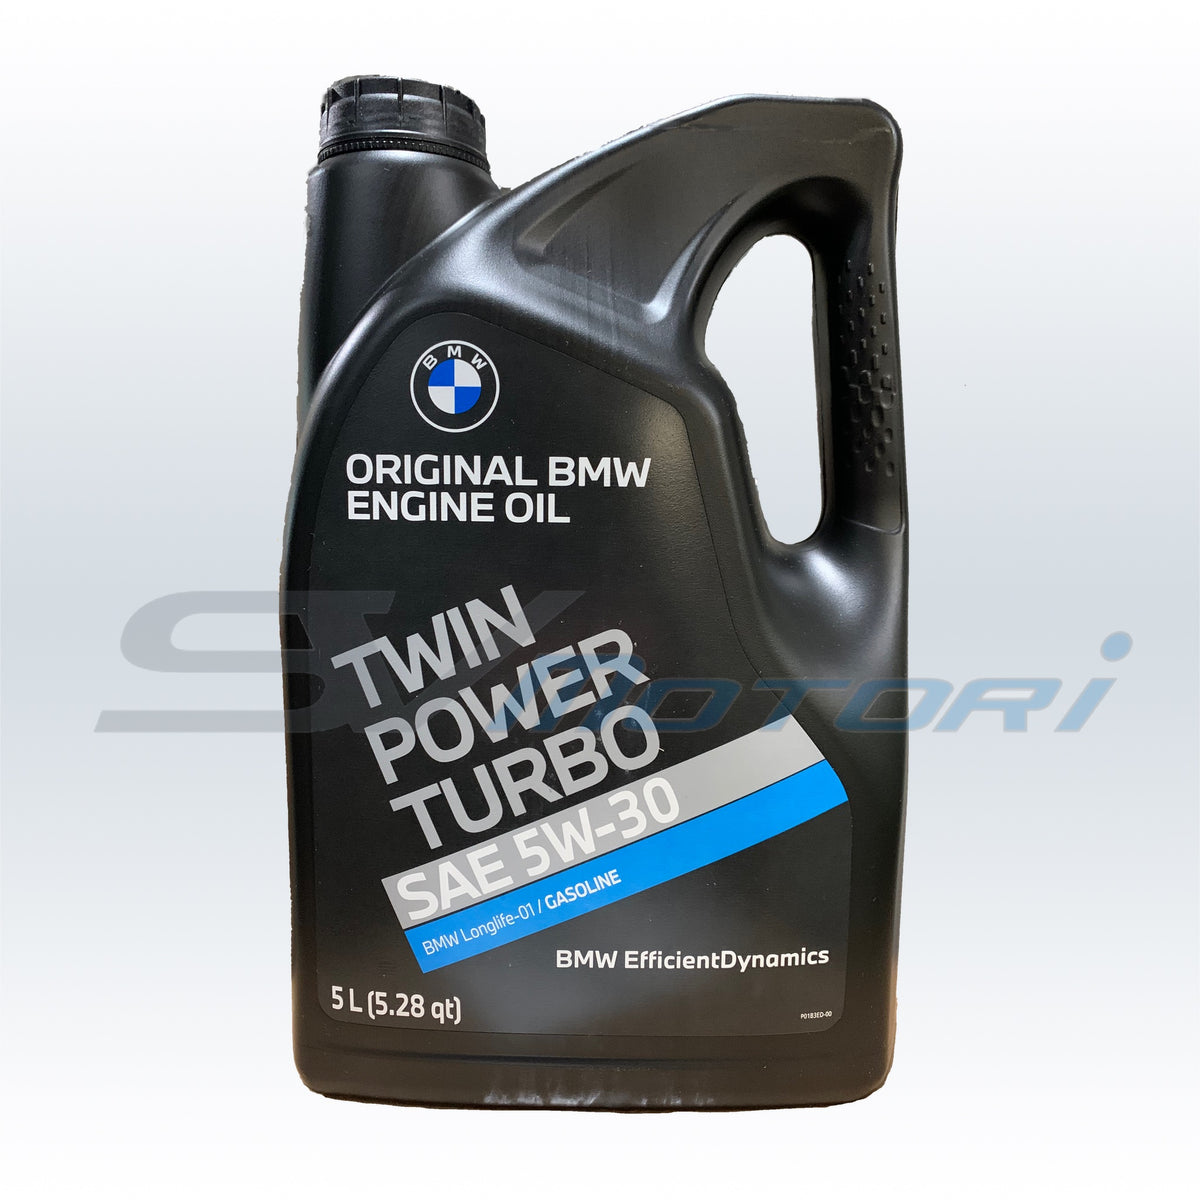 BMW TWINPOWER TURBO LL01 5W30 Gasoline Full Synthetic 5 Liter SV